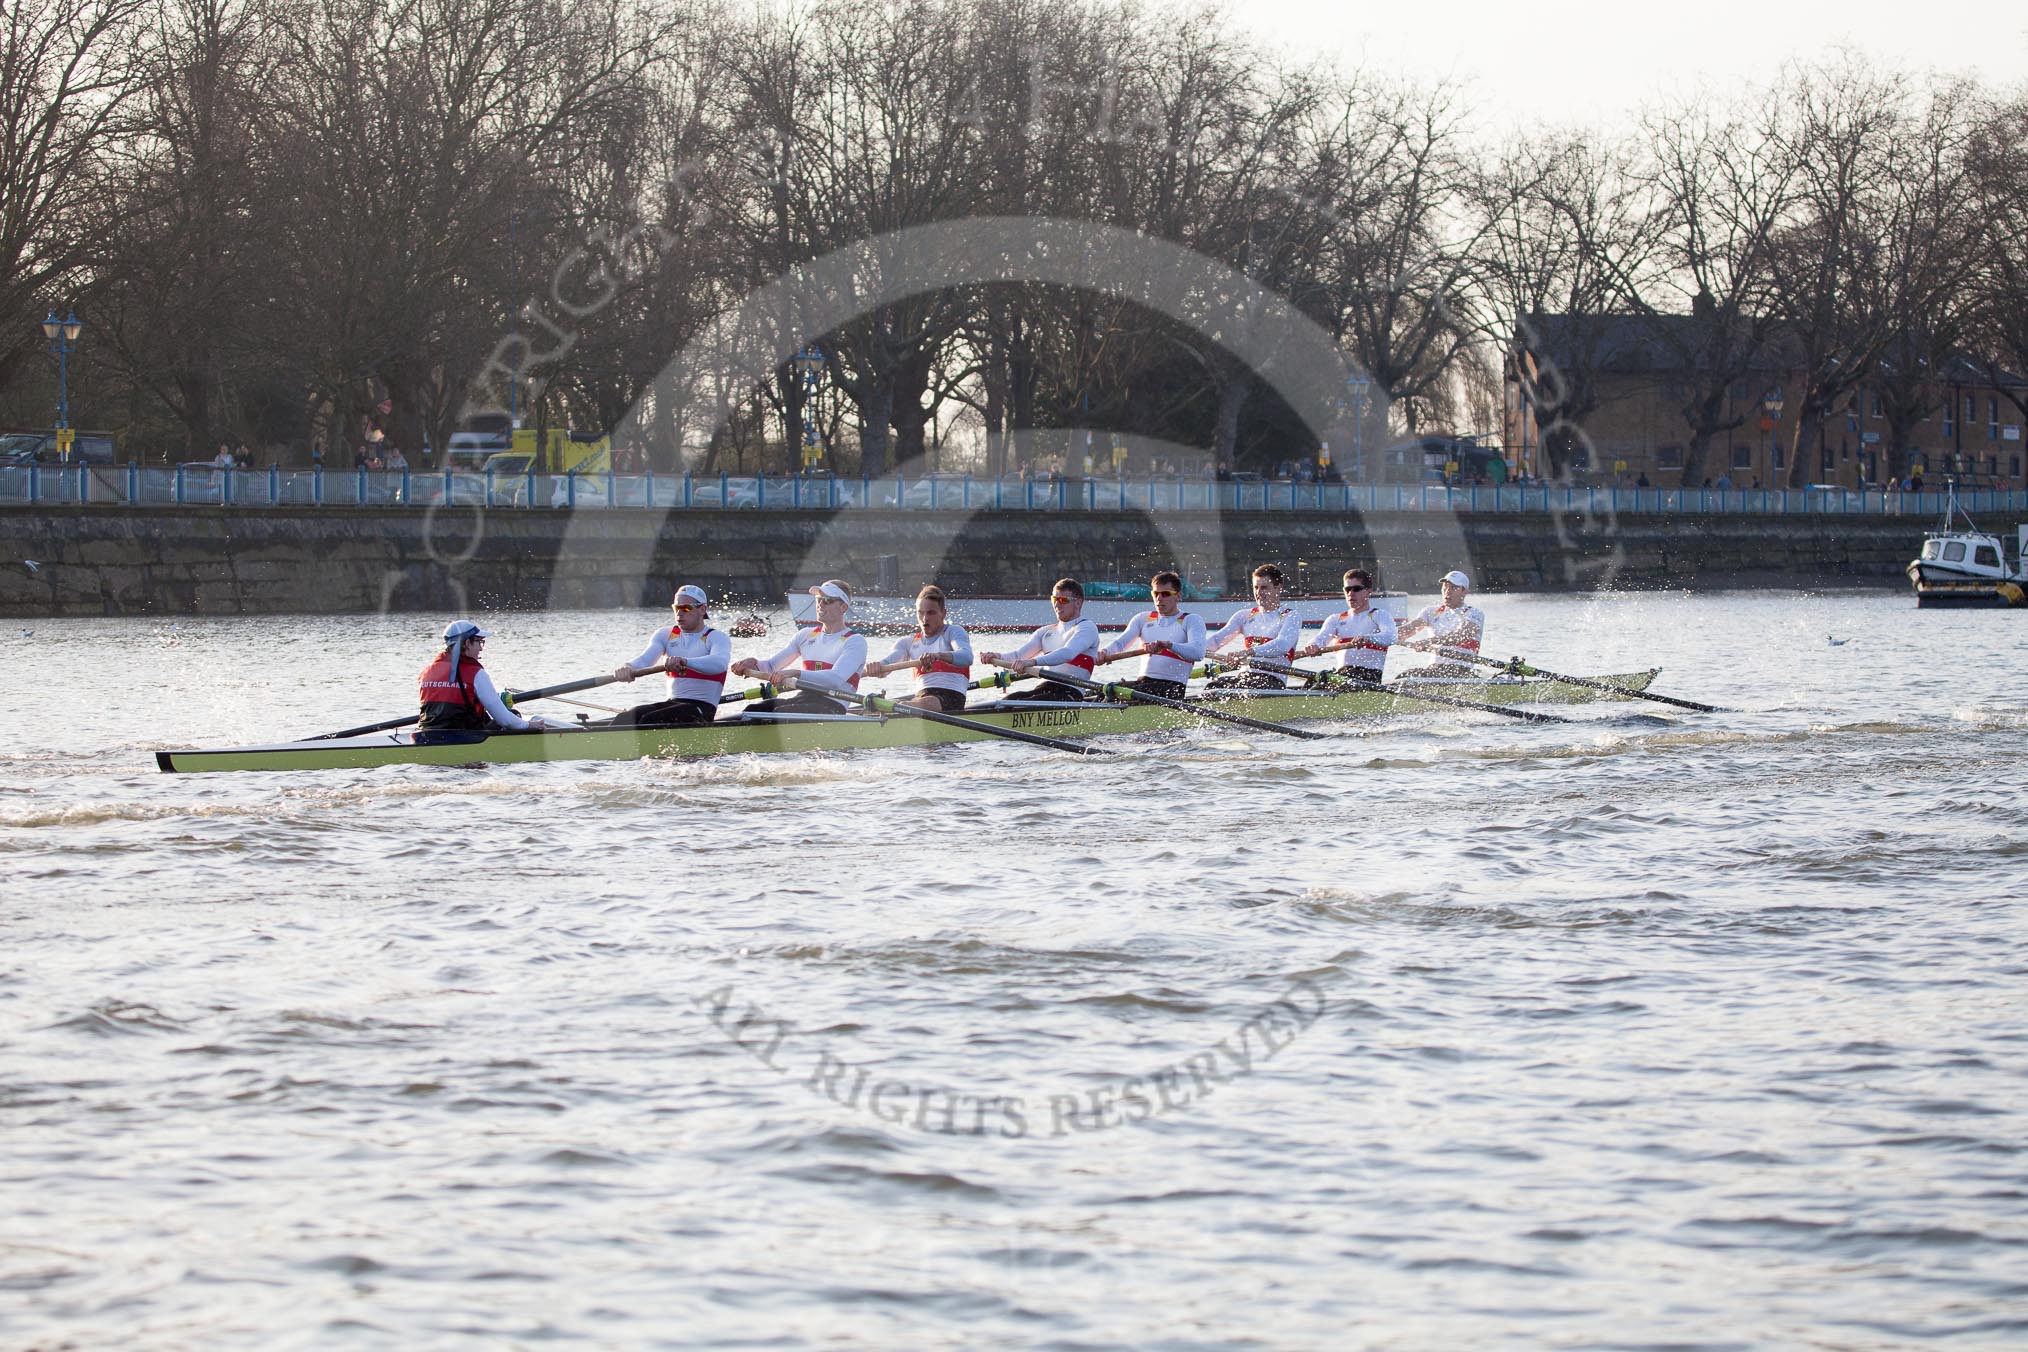 The Boat Race season 2014 - fixture OUBC vs German U23: The German U23-boat at the Putney boat houses..
River Thames between Putney Bridge and Chiswick Bridge,



on 08 March 2014 at 16:47, image #59